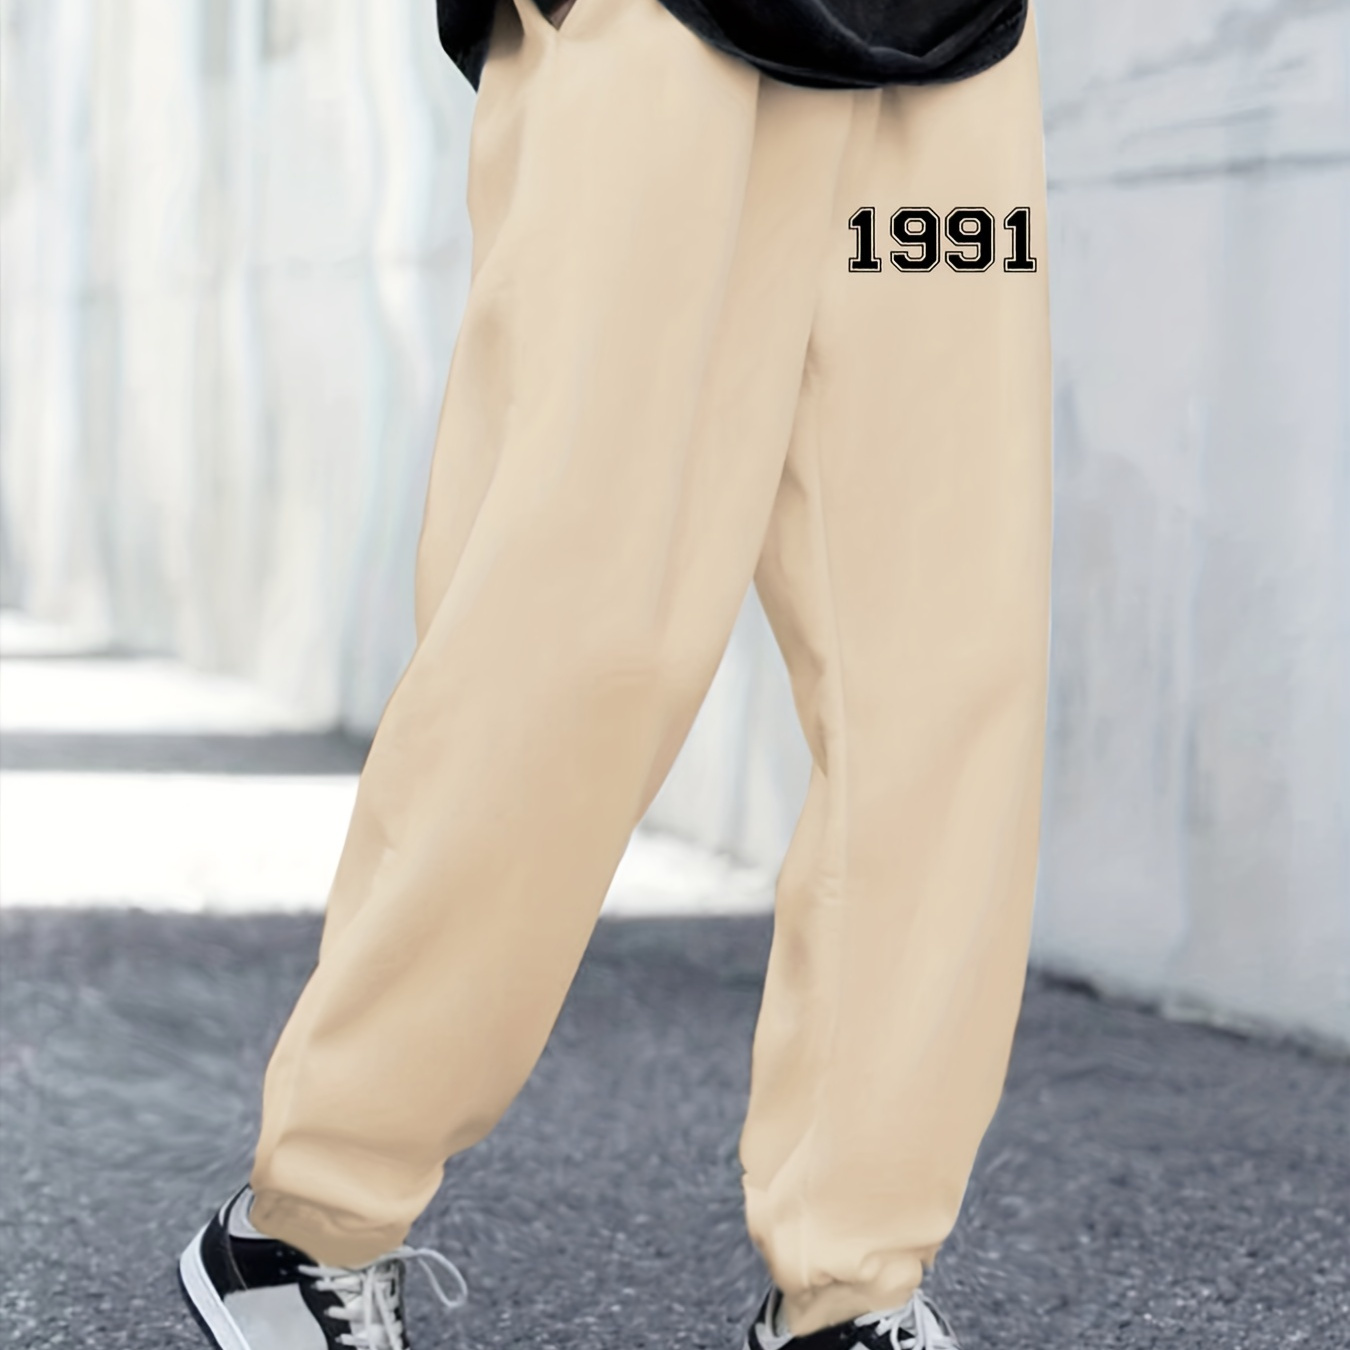 

Number 1991 Pattern Printed Men's Trendy Trousers With Pockets, Drawstring Active Sweatpants, Comfortable Casual Pants, Men's Outfits